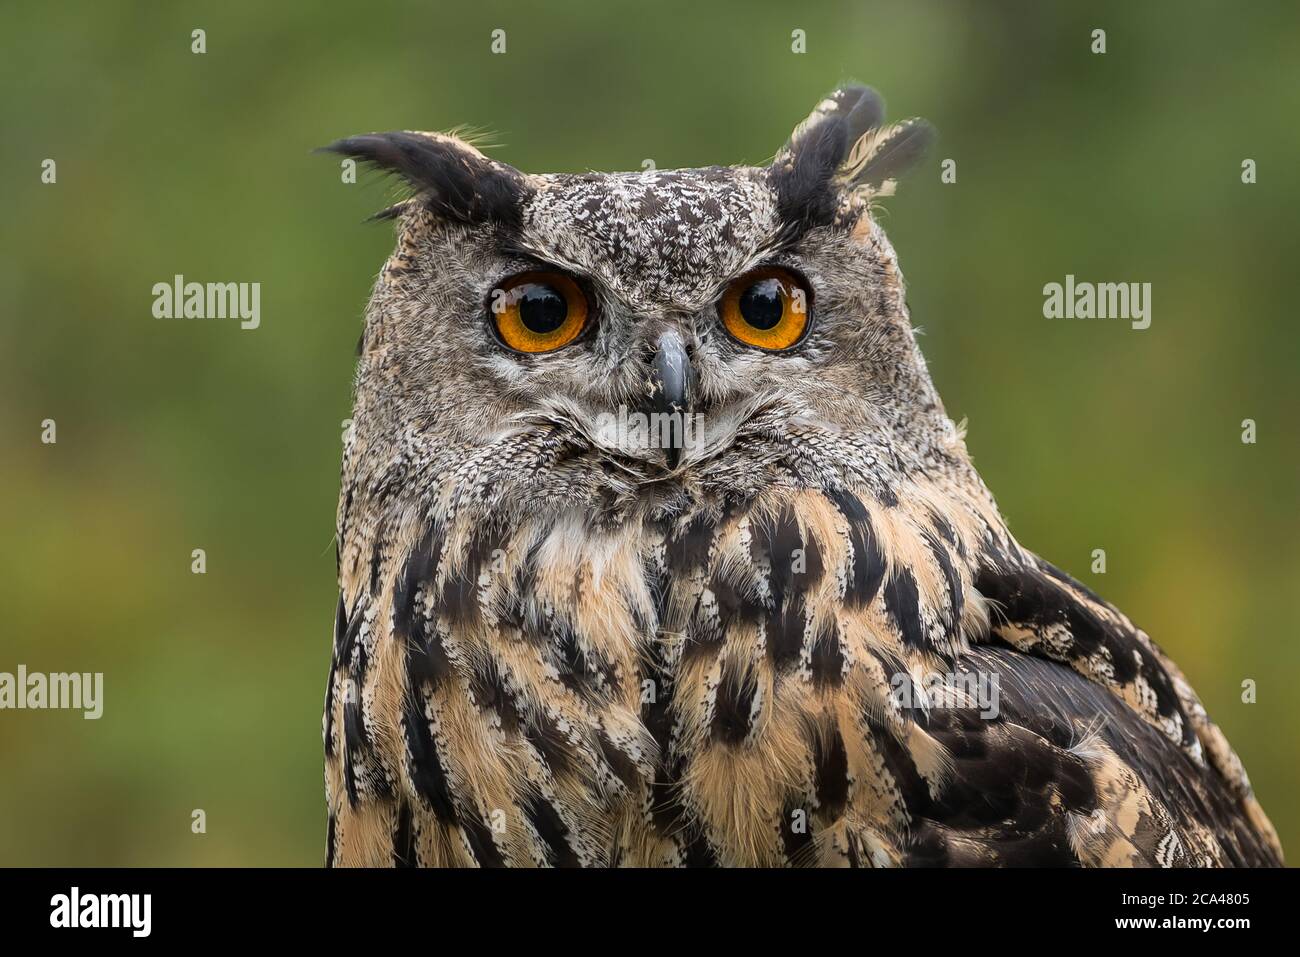 The Eurasian eagle-owl (Bubo bubo) is a species of eagle-owl that resides in much of Eurasia. Stock Photo